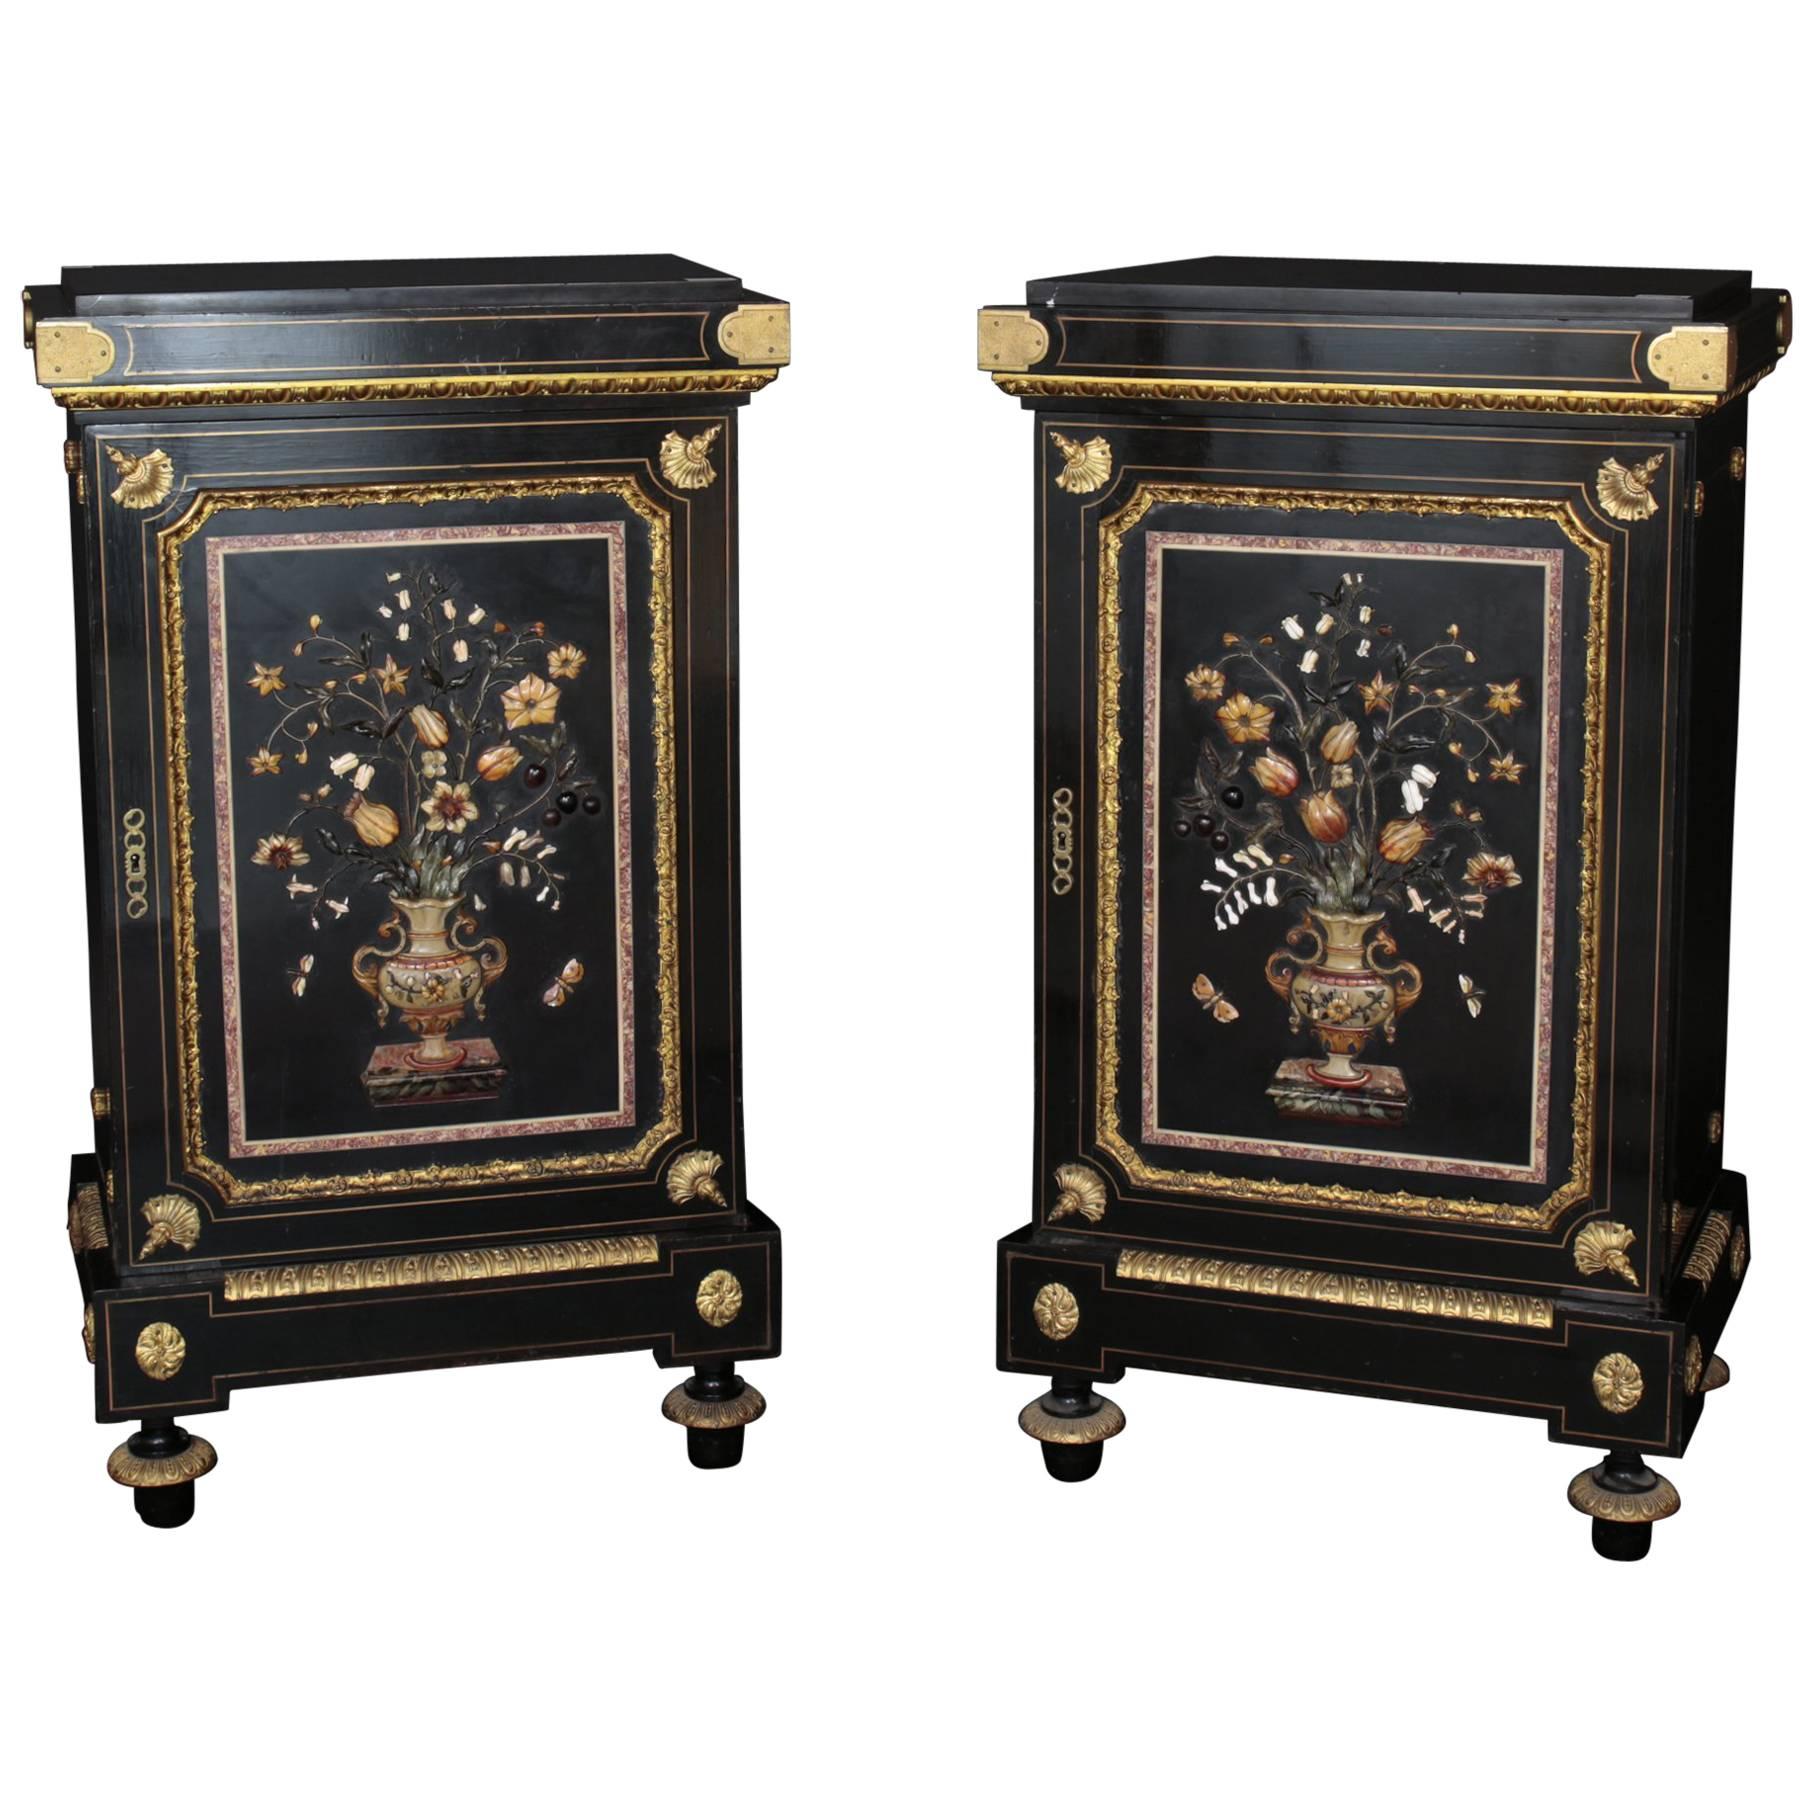 Fine Pietre Dure Pair of Side Cabinets by Mombro the Eldest, 19th Century For Sale